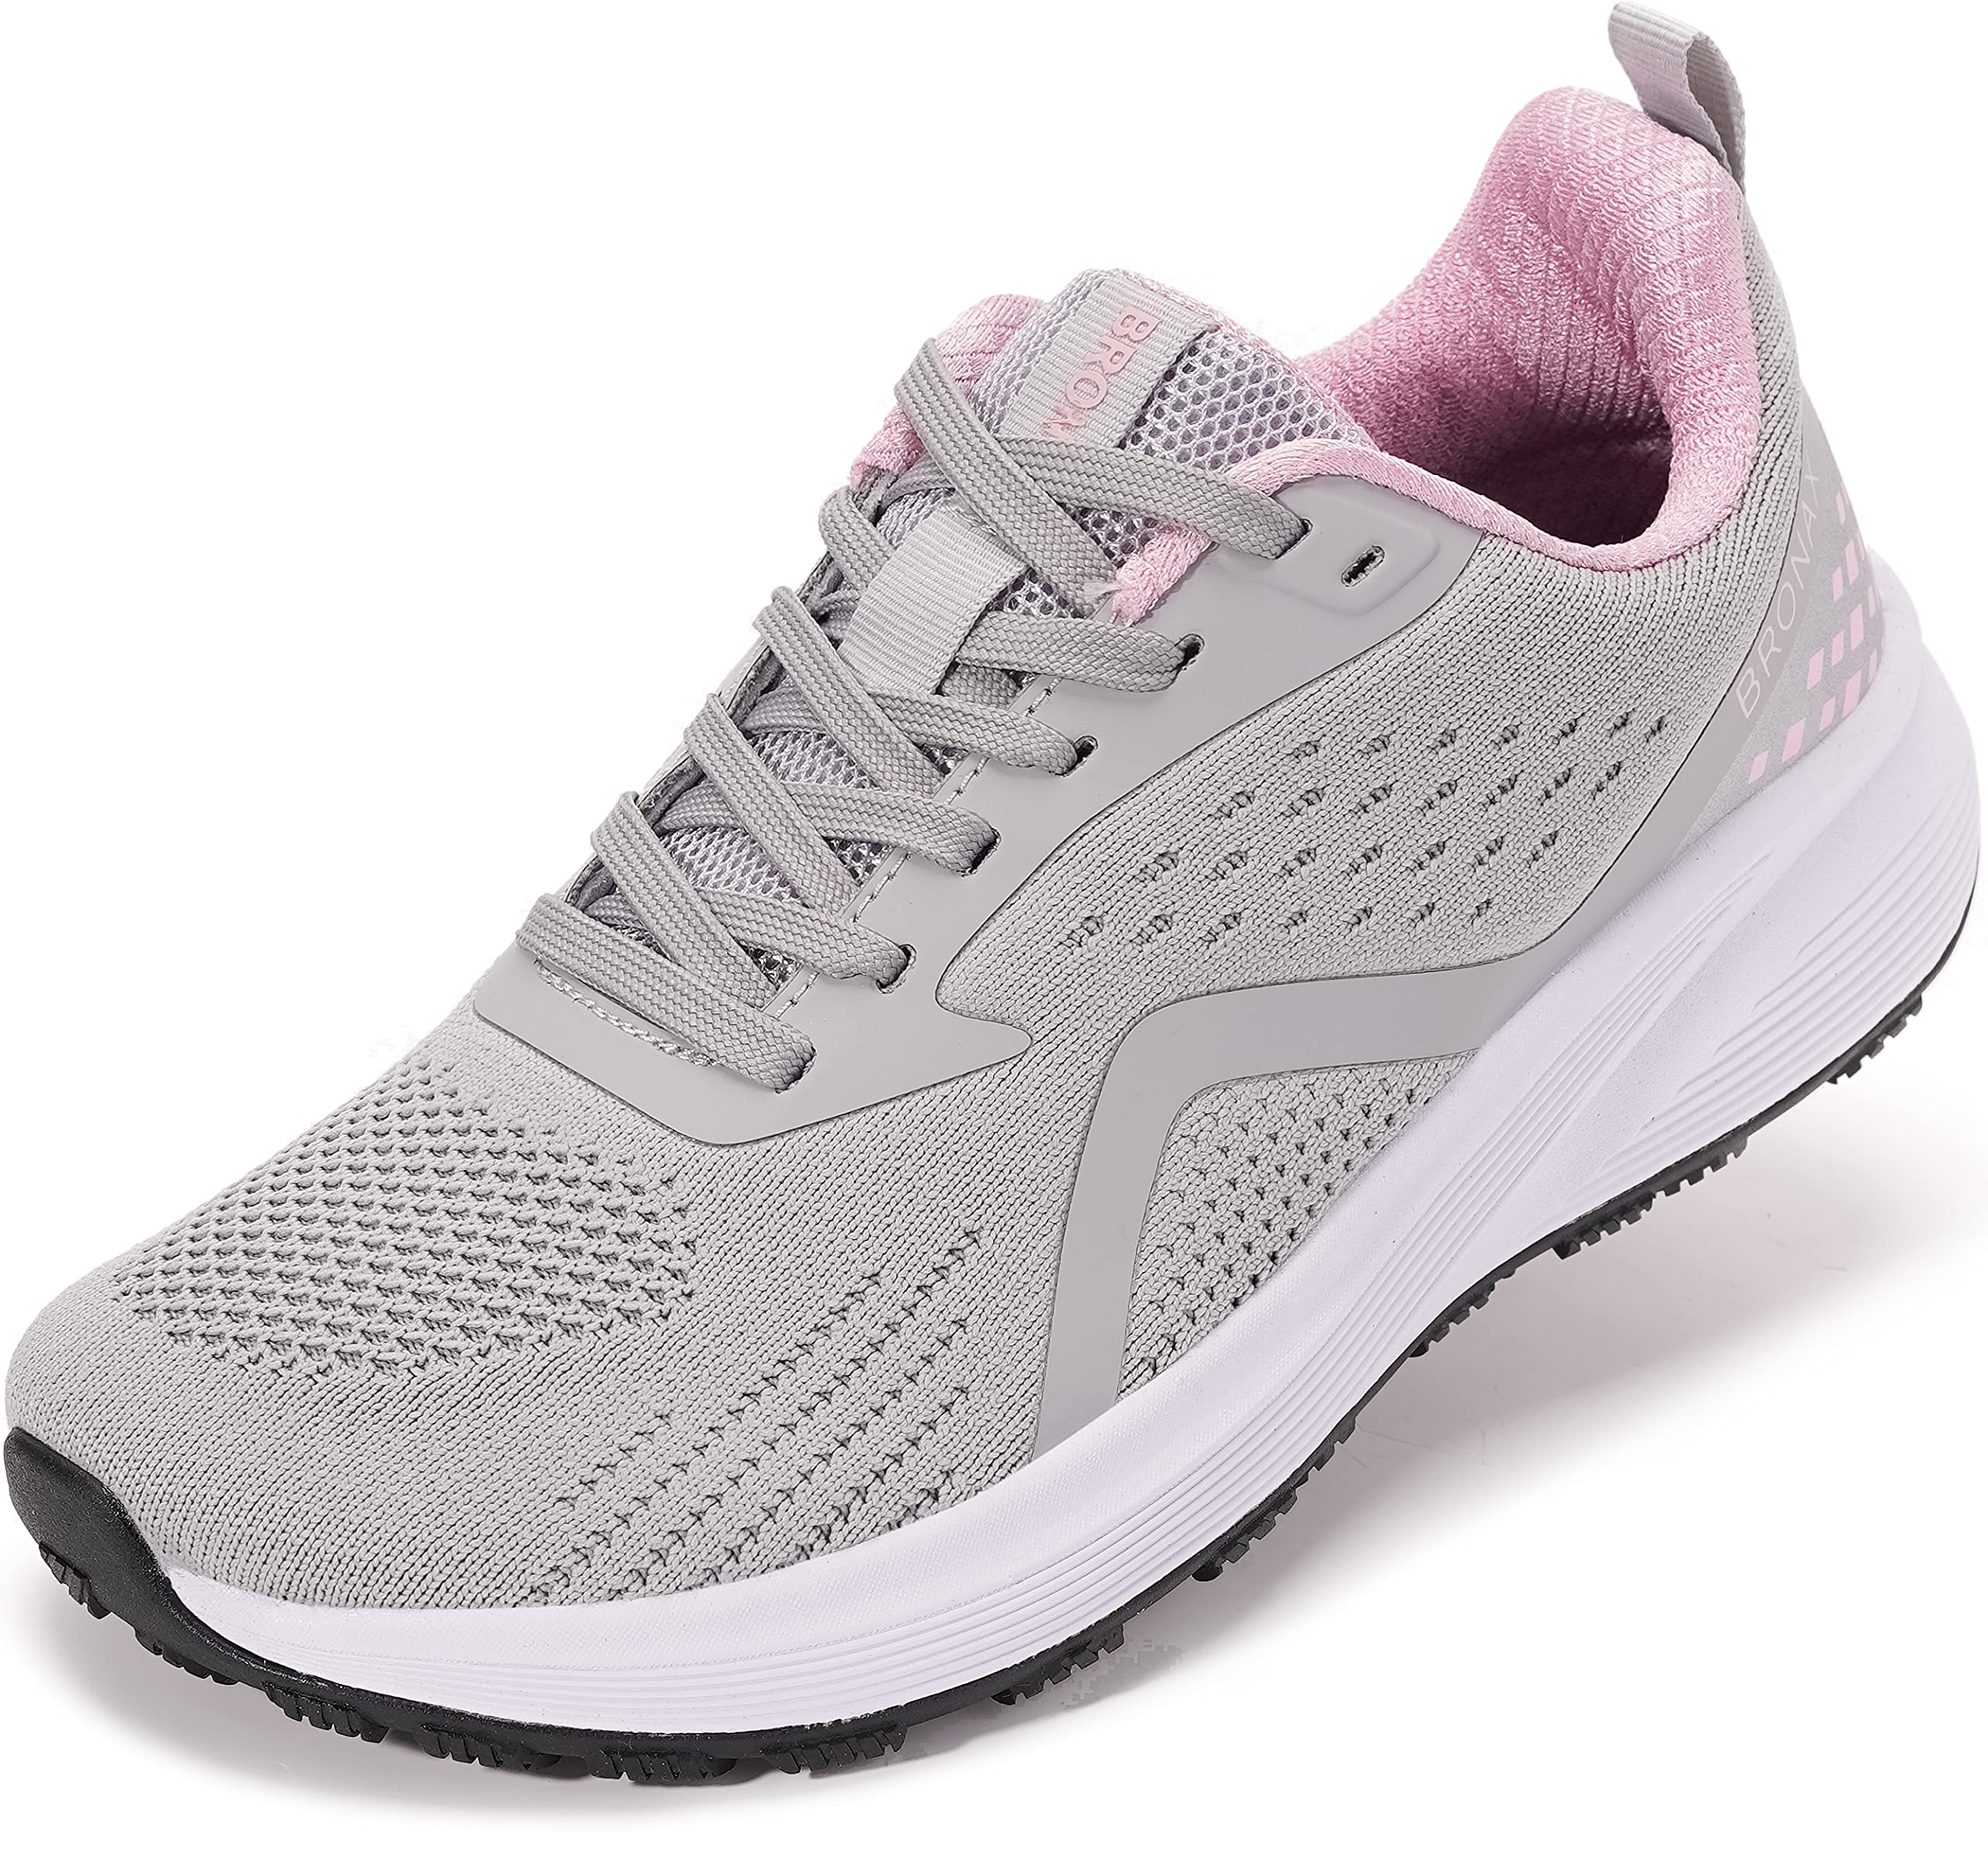 BRONAX Womens Wide Tennis Running Shoes Gym Workout Training Size 10w with Arch Support Athletics Sport Stylish Female Sneakers 